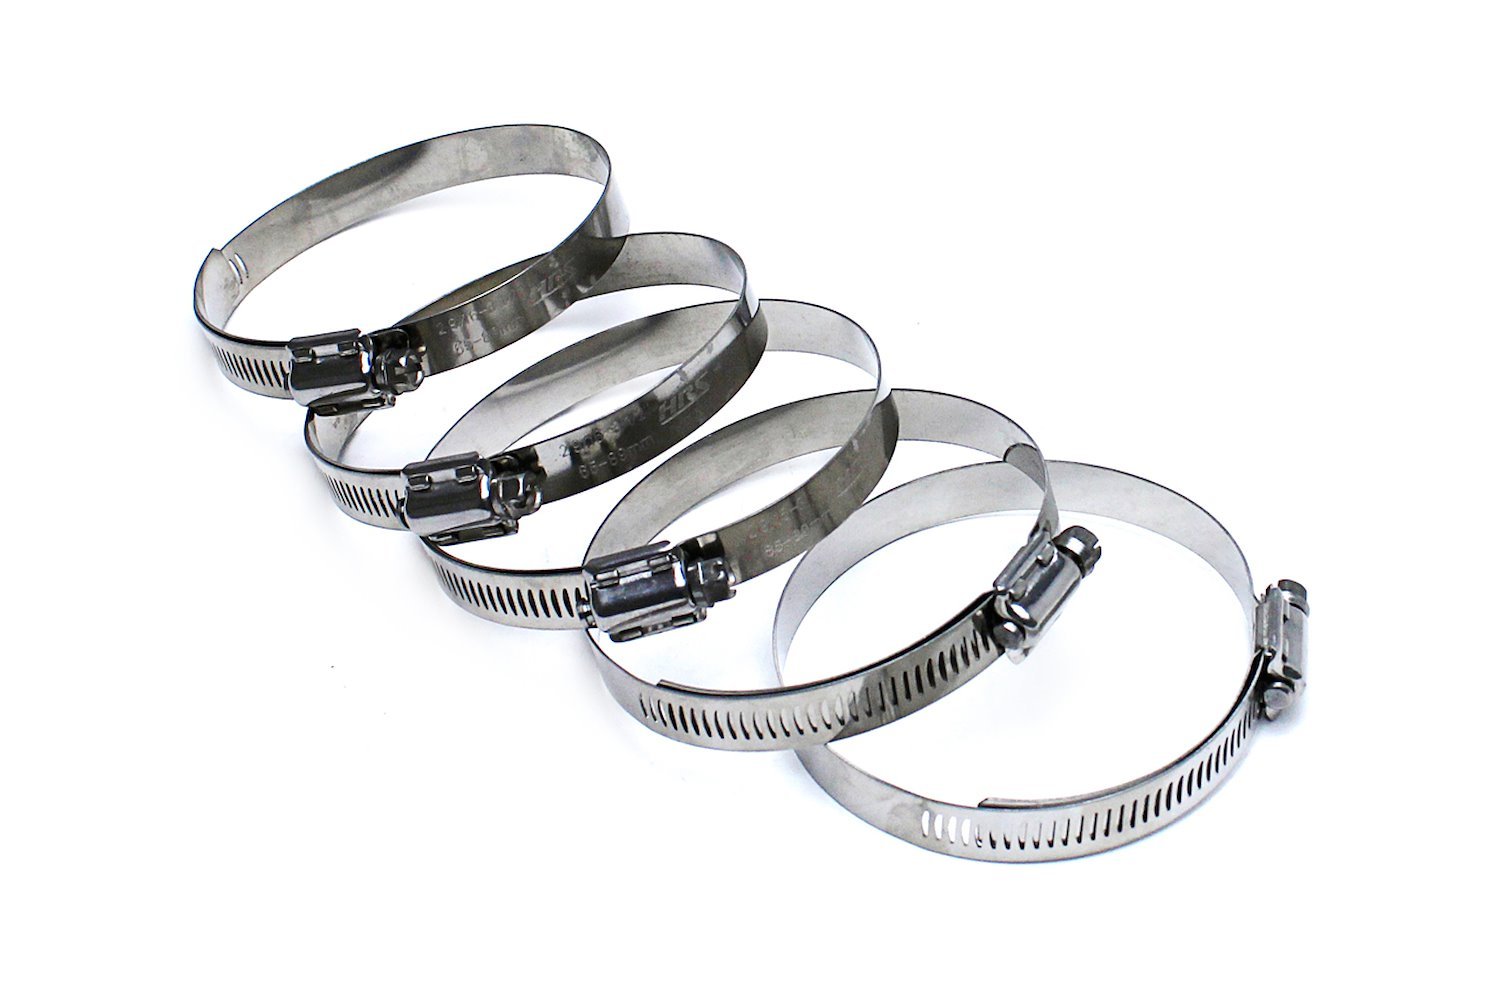 SSWC-117-140x5 Stainless Steel Worm Gear Hose Clamp, Effective Range: 4-5/8 in.- 5-1/2 in., 5Pc